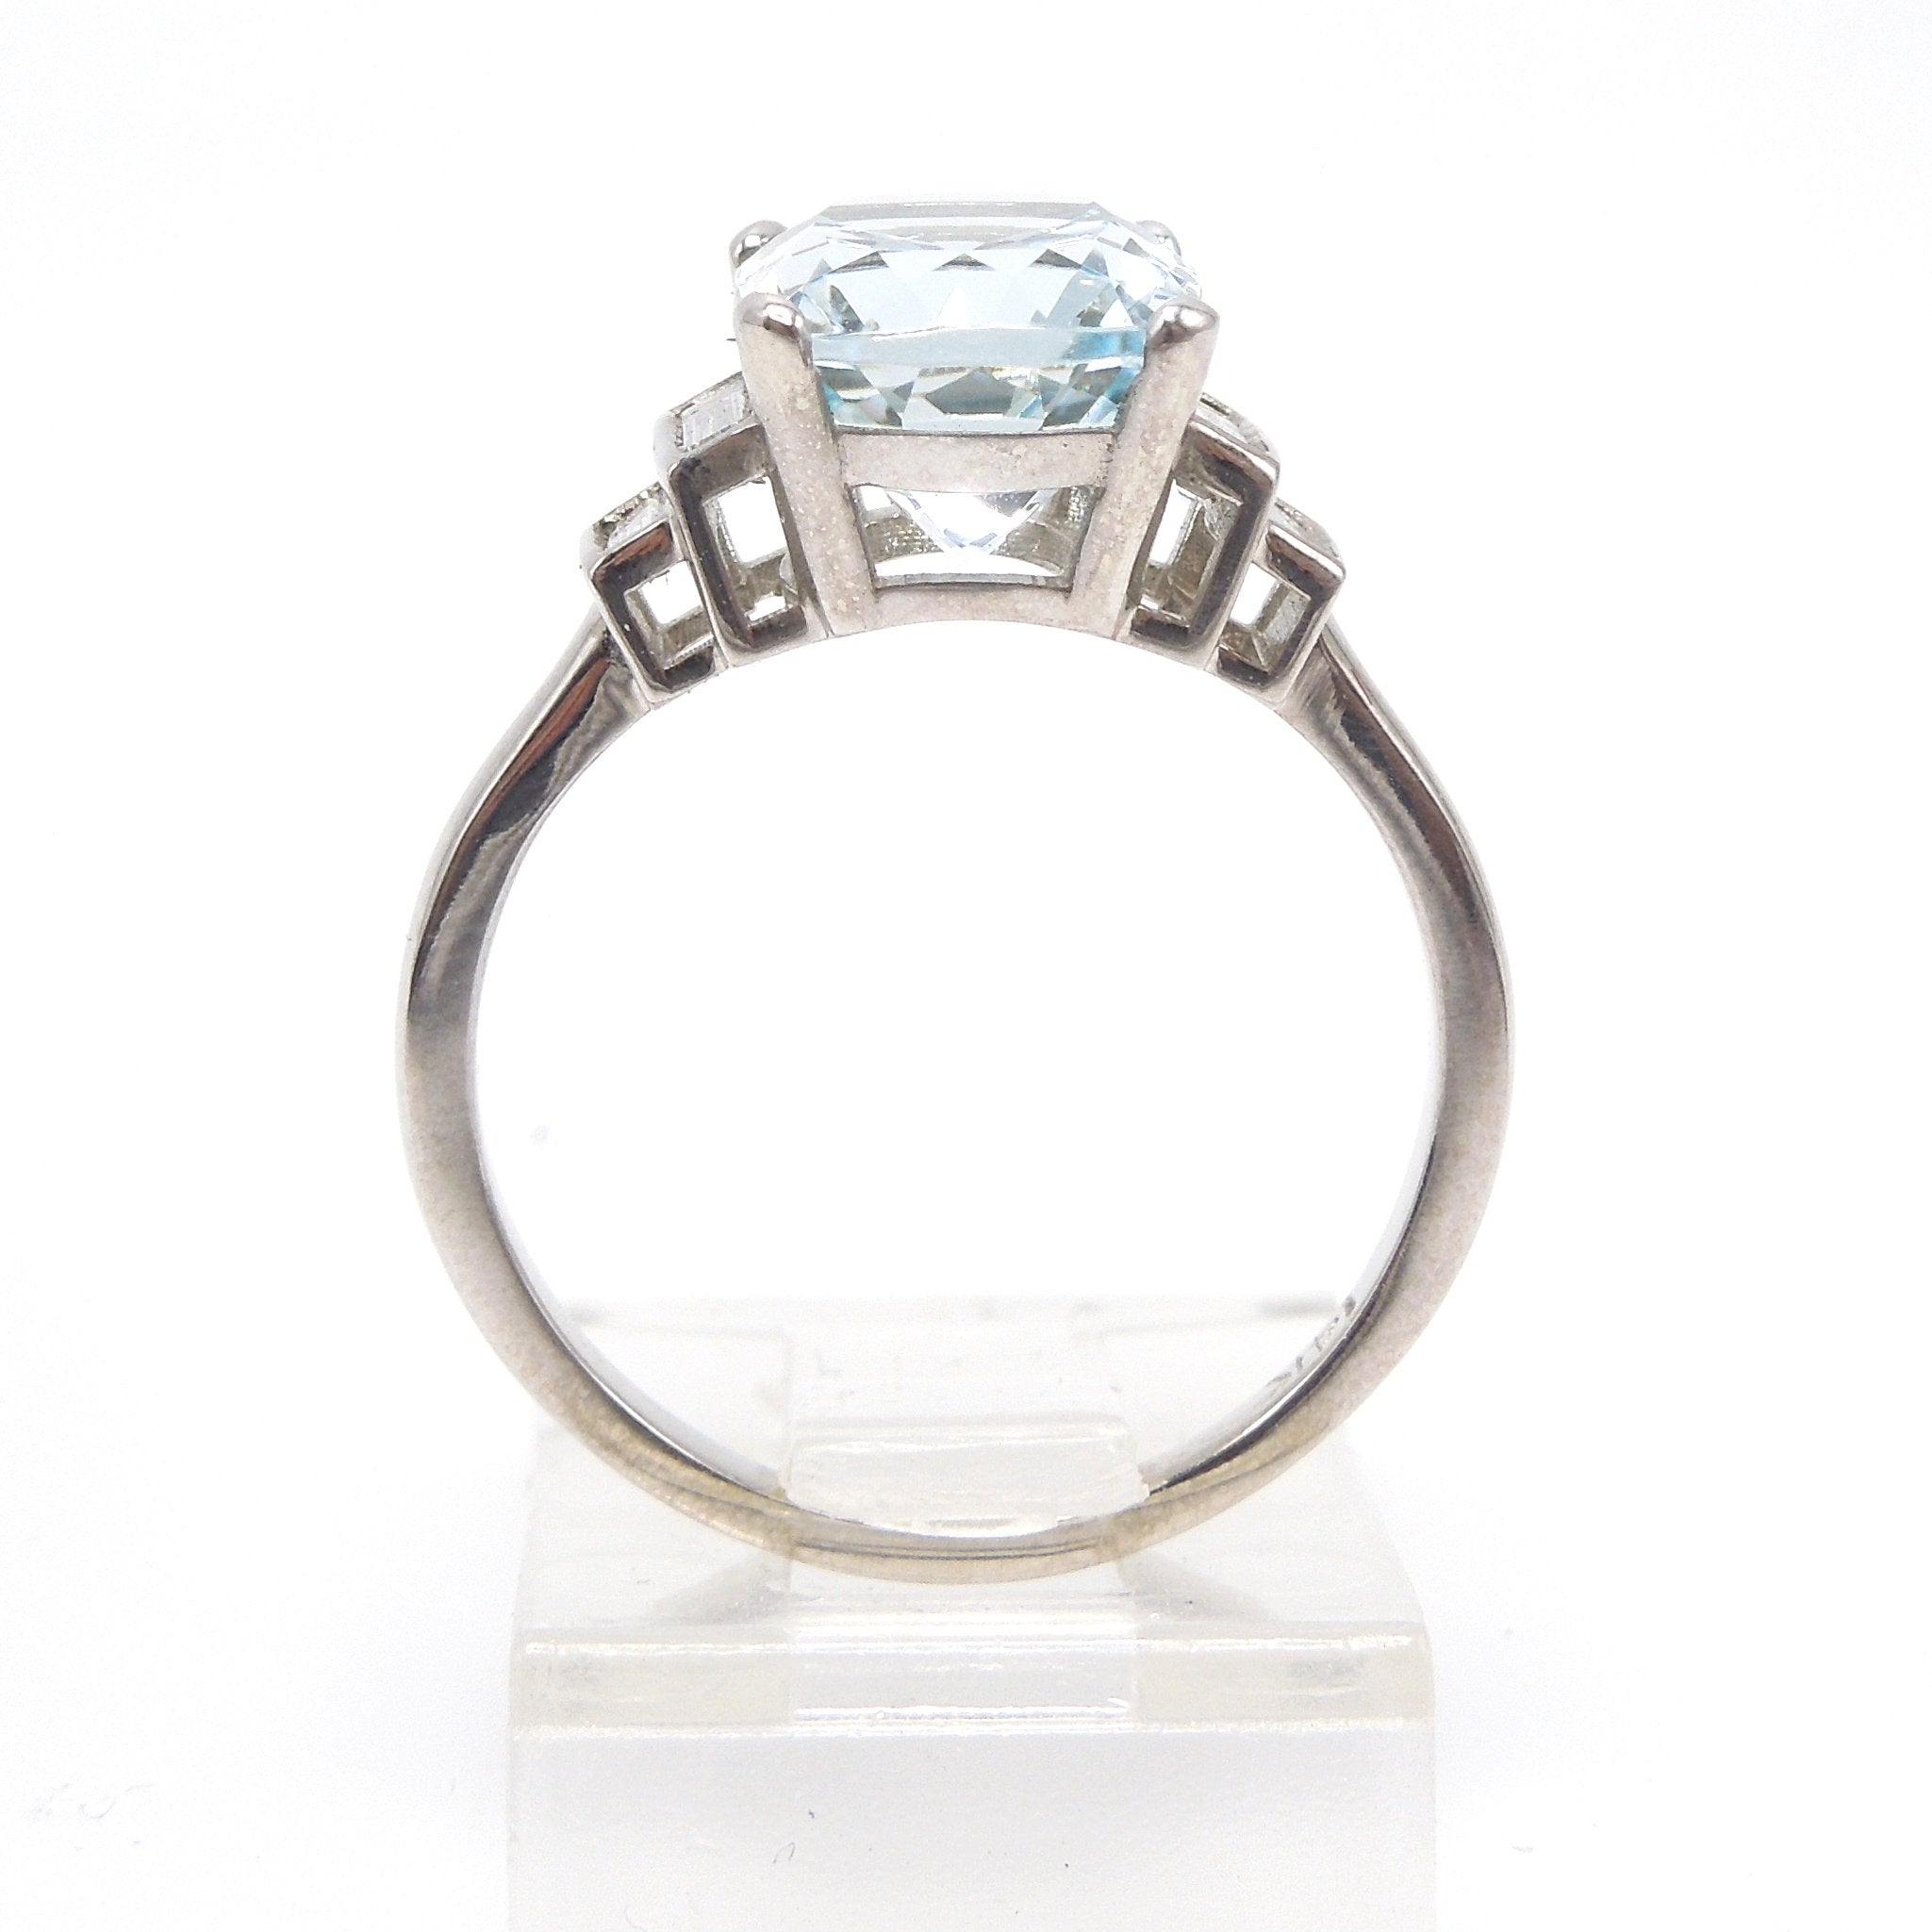 Art Deco Style Ring - Antique Oval Cut Aquamarine with Baguettes in White Gold